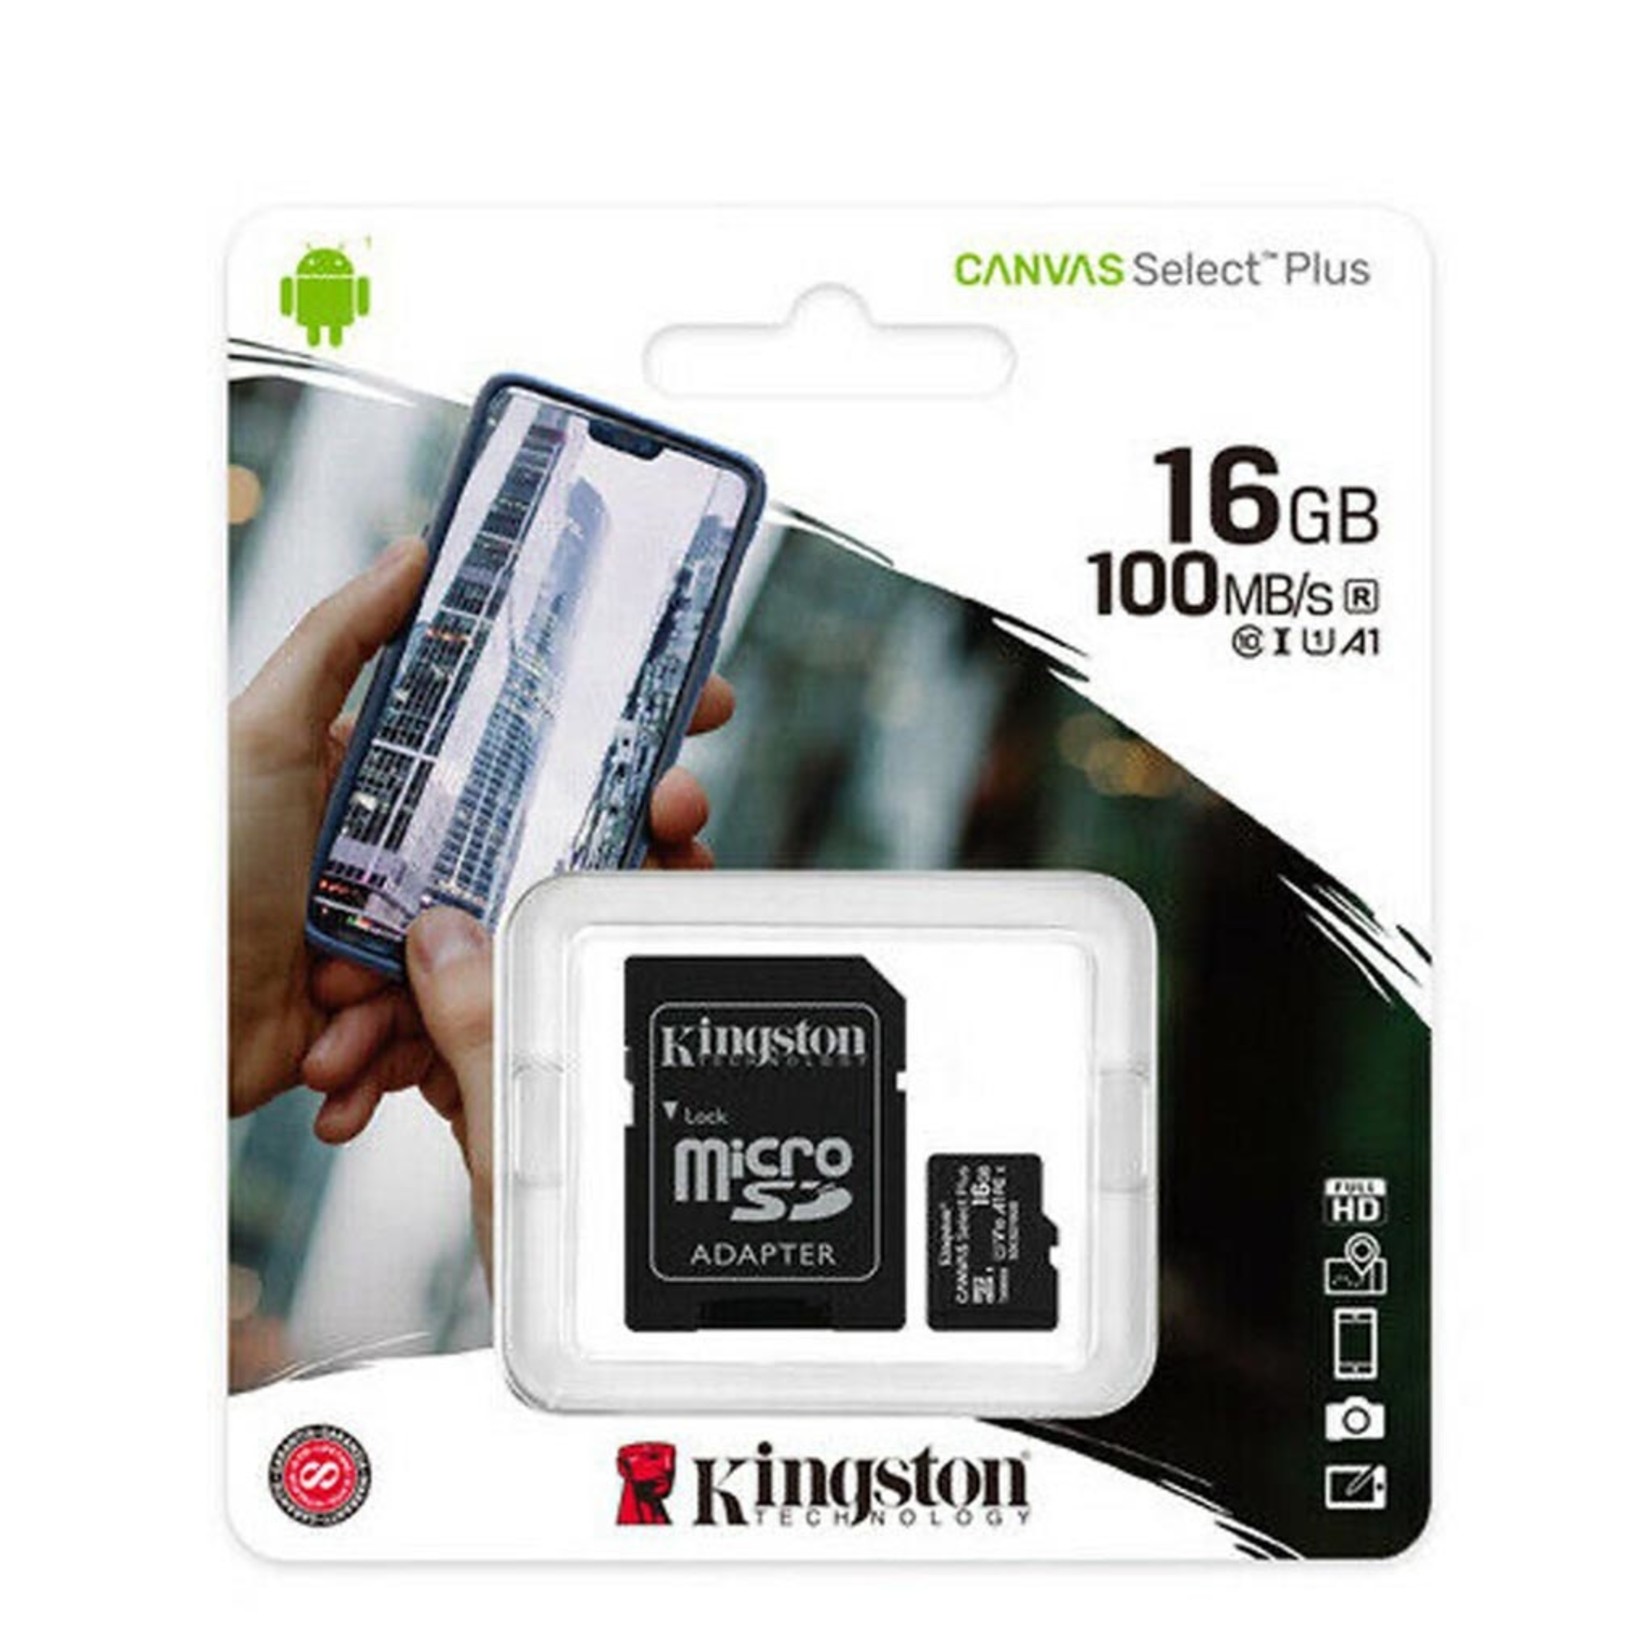 KINGSTON | Class 10 Micro SD Memory Cards with Adapter